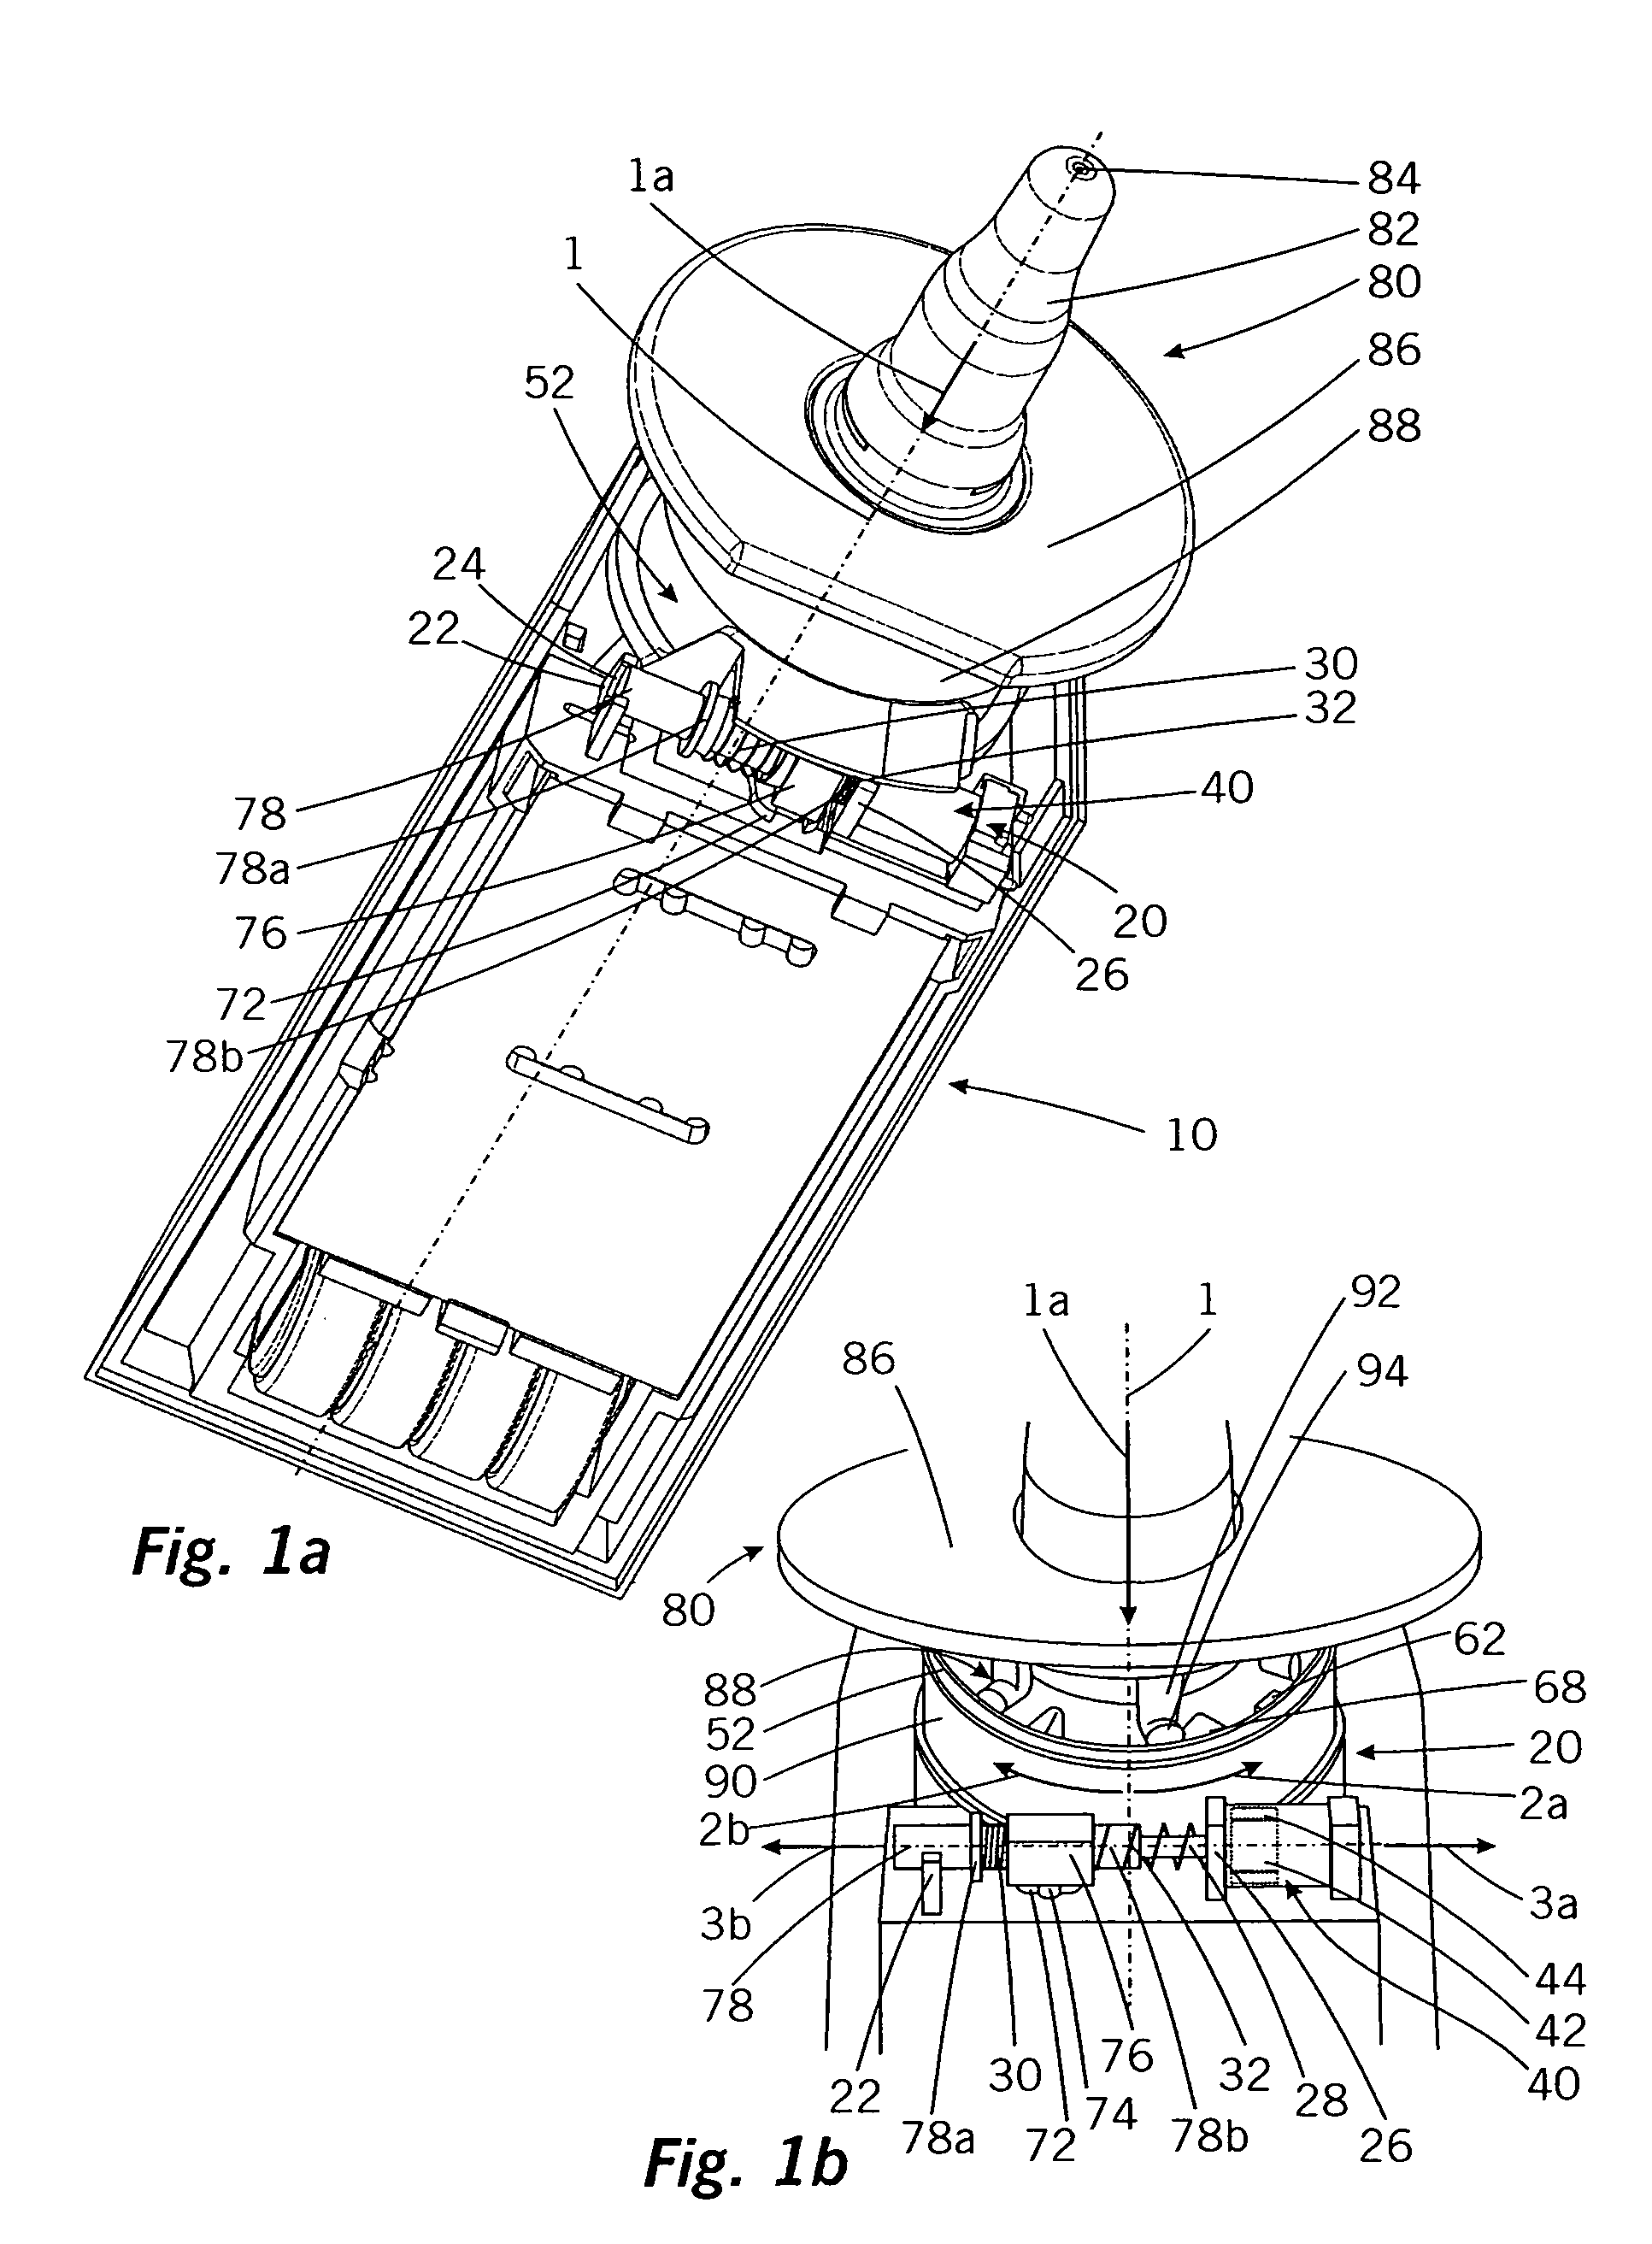 Discharge device